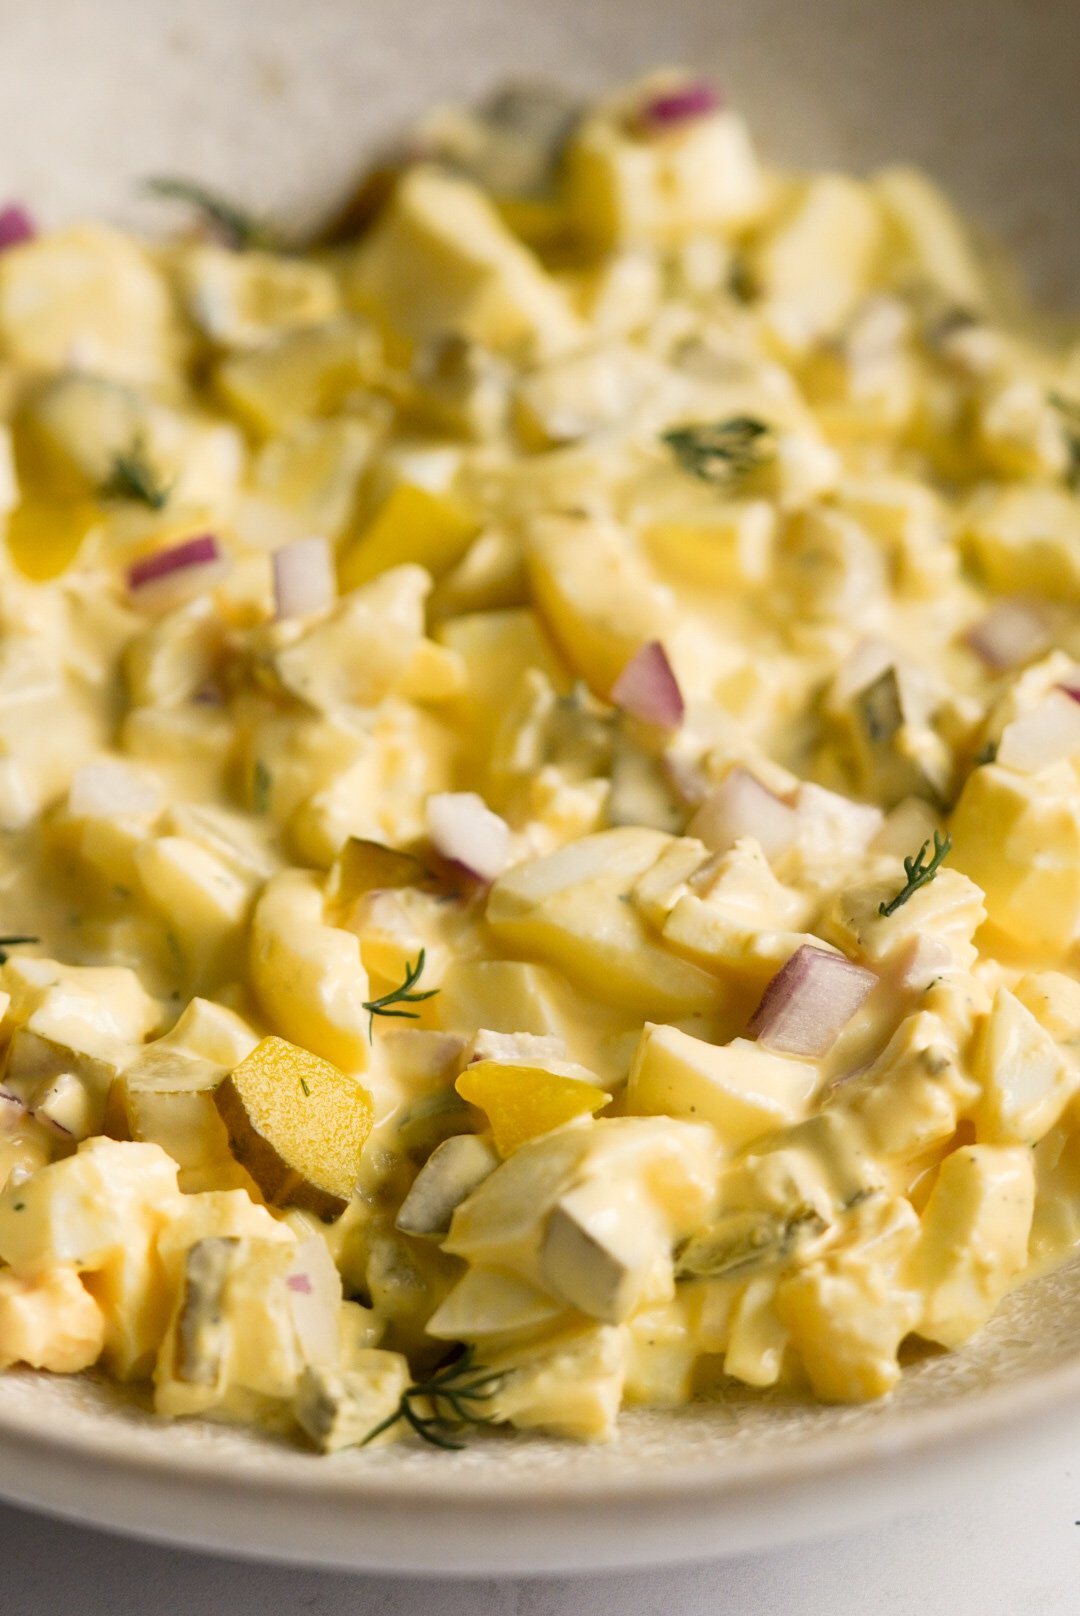 https://wellnessbykay.com/wp-content/uploads/2022/07/egg-salad-with-pickles-and-dill.jpg